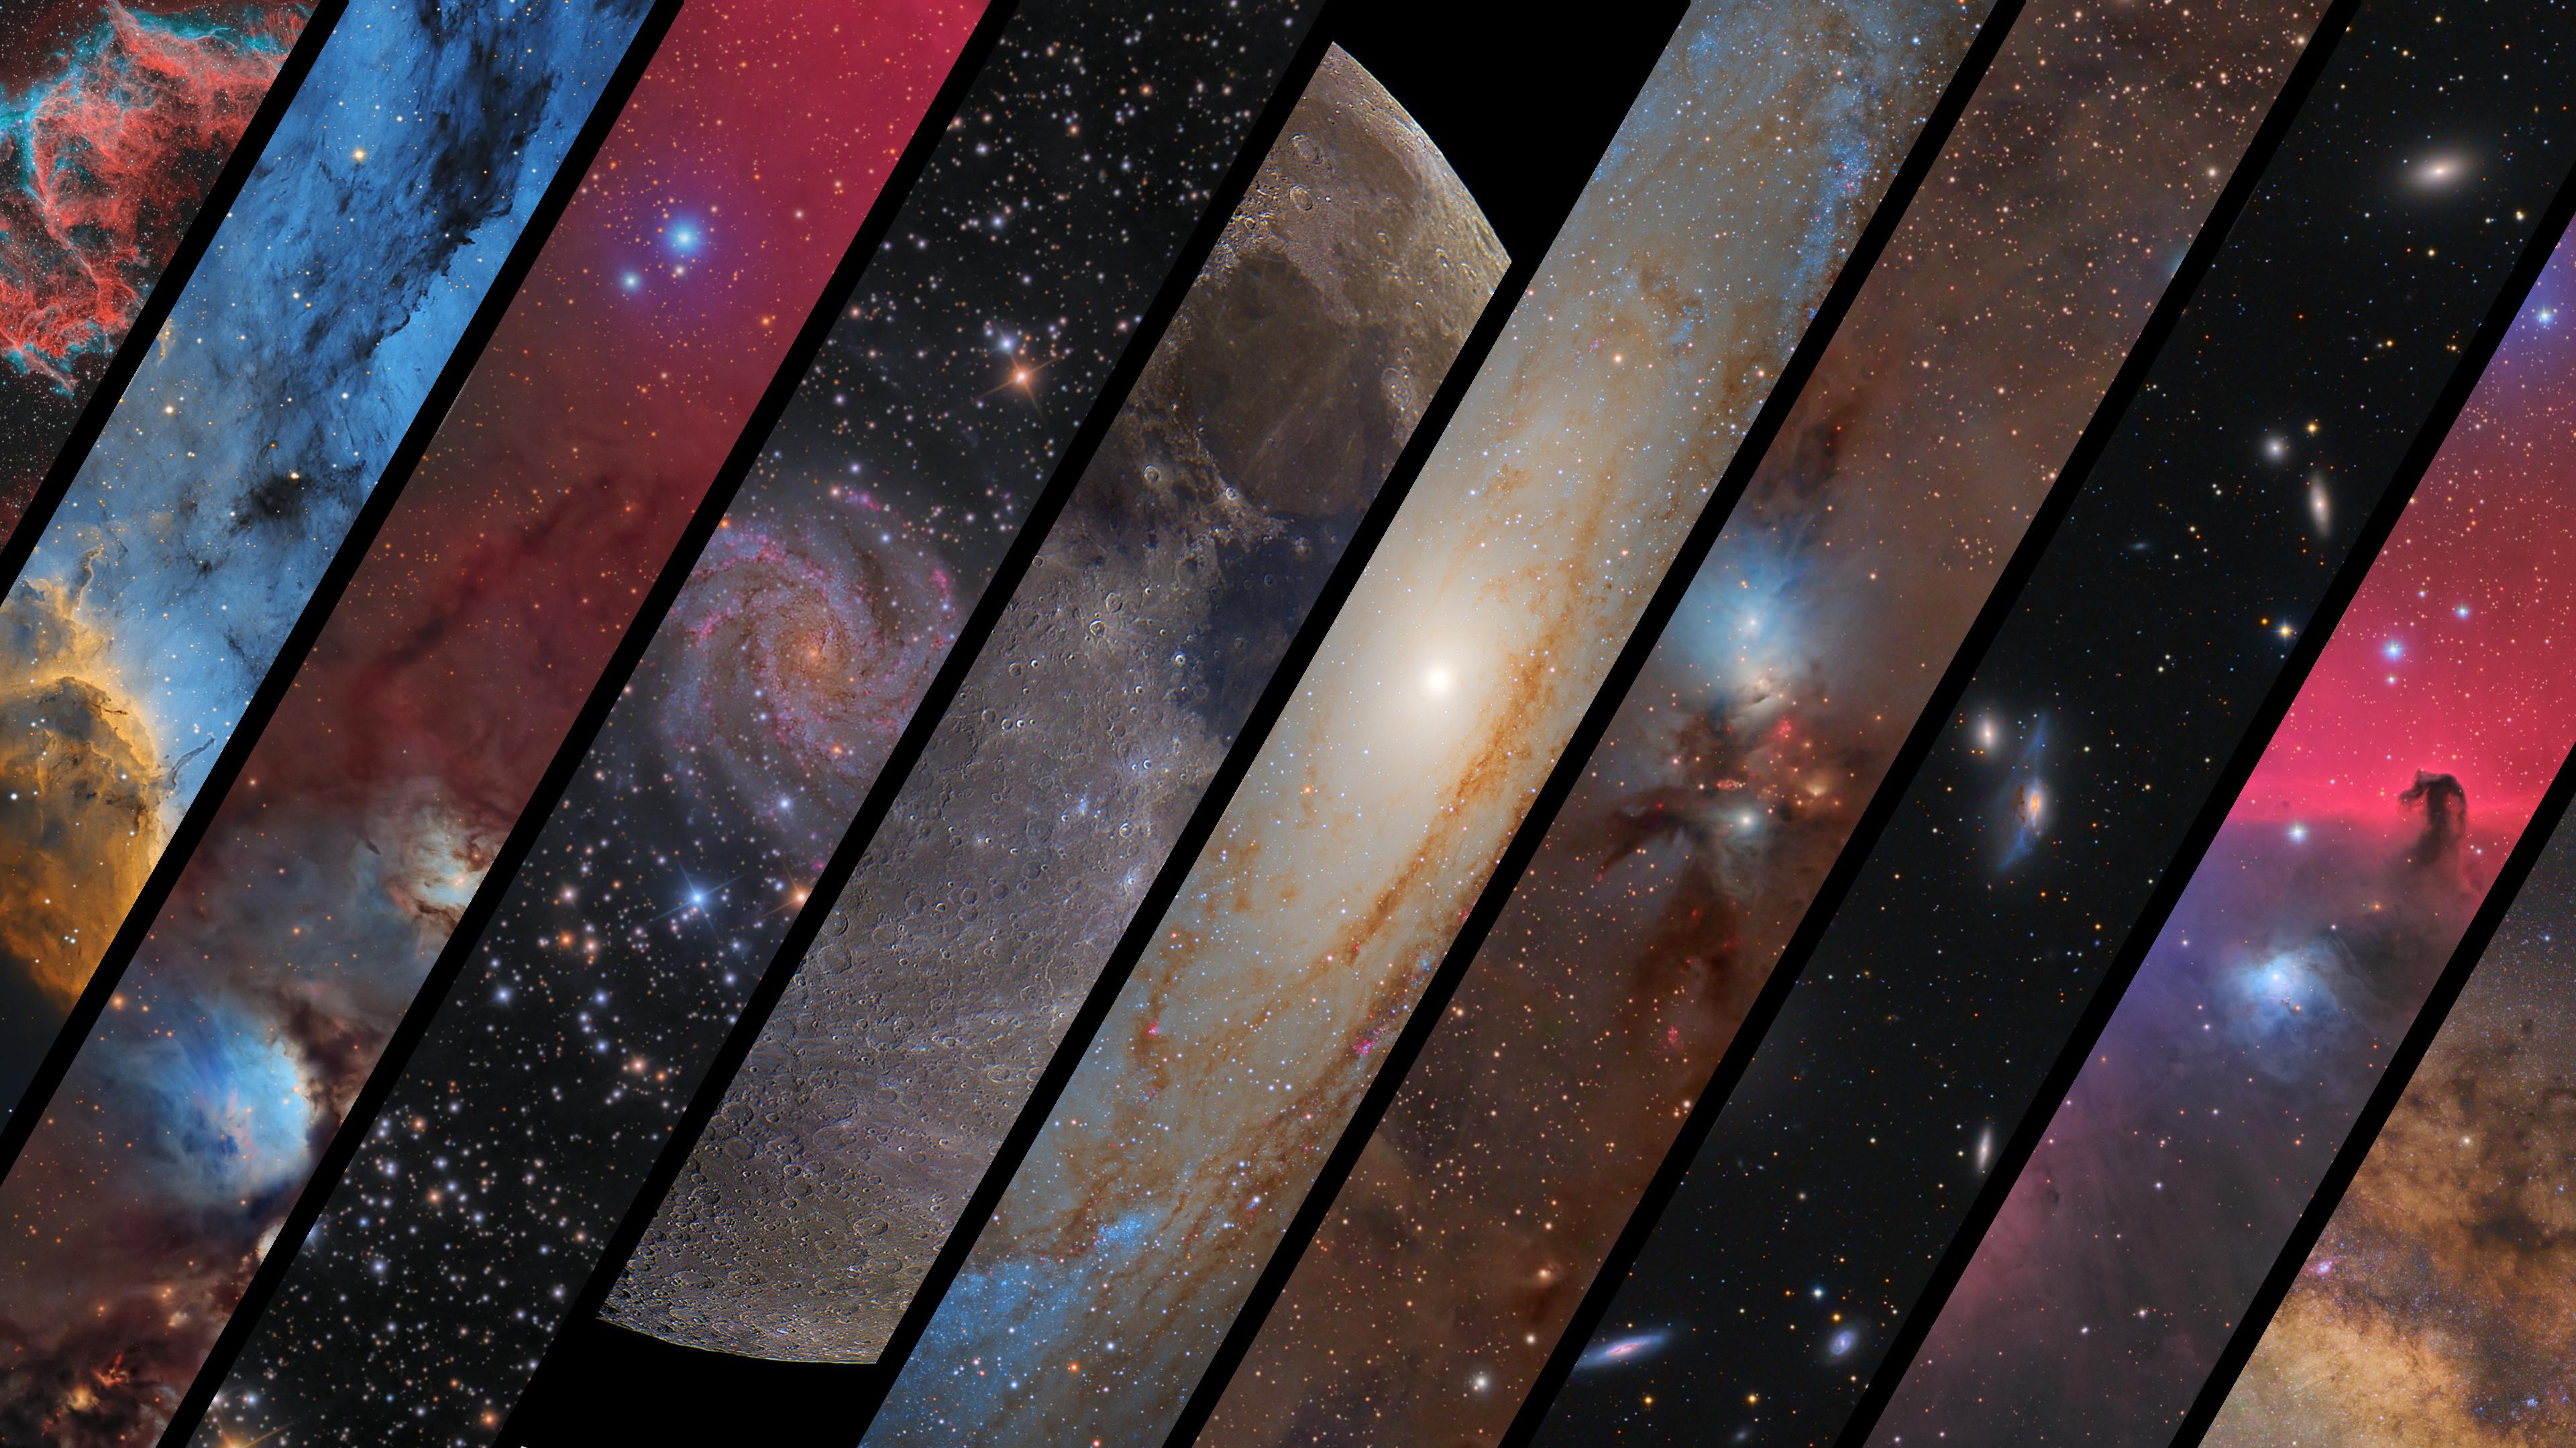 I Made A 4k Wallpaper Consisting Of My Favorite Astronomy Image